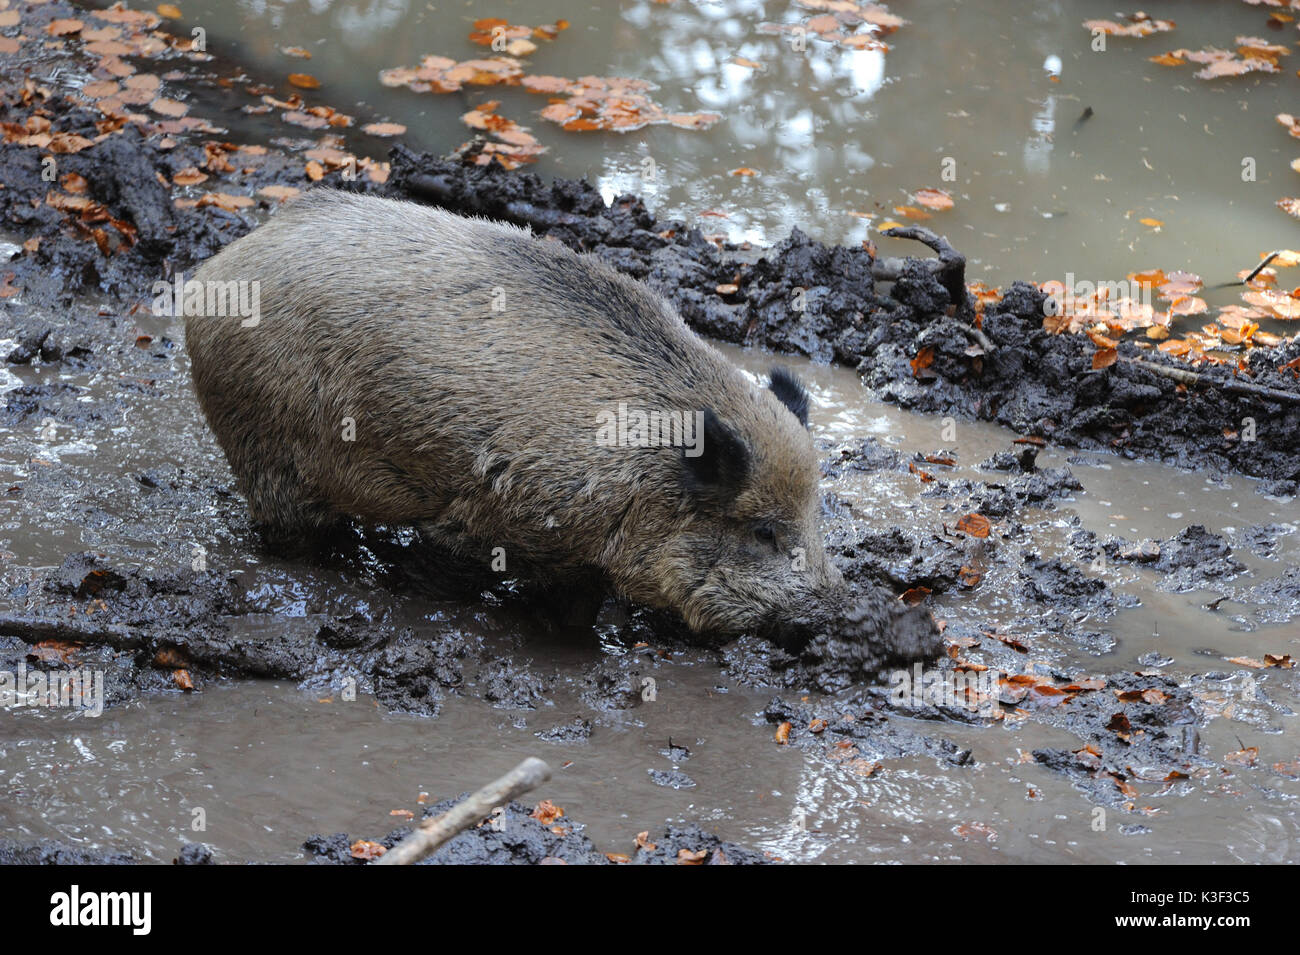 Wild boar in the wallowing, Stock Photo